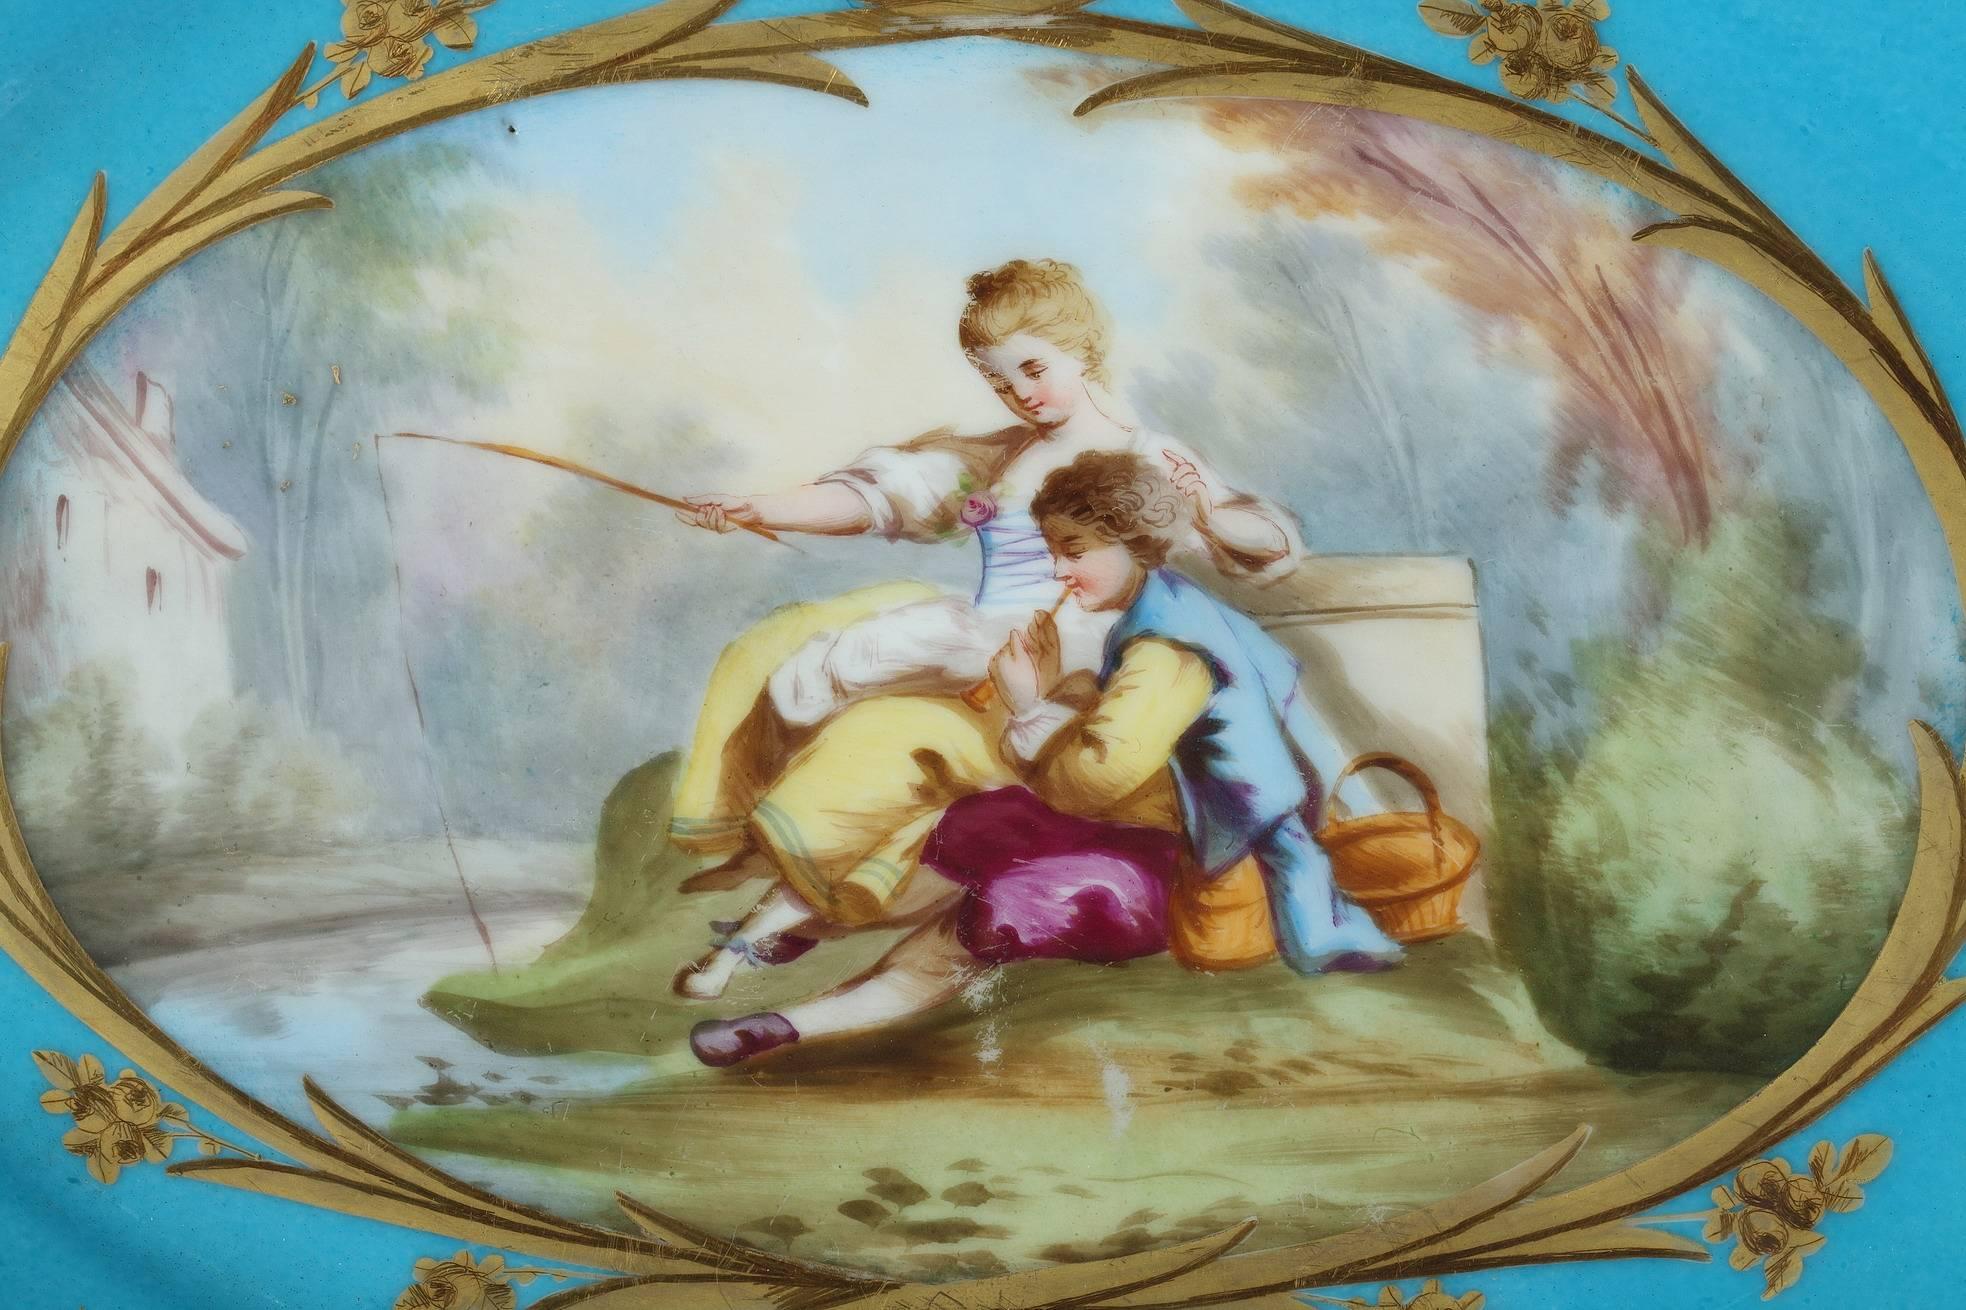 Oval blue porcelain cup with polychromatic decoration composed of a large cartouche with gilt-decorated borders depicting a man and a young woman in a landscape, sitting on the grass near a lake. The woman is fishing while her lover is playing the